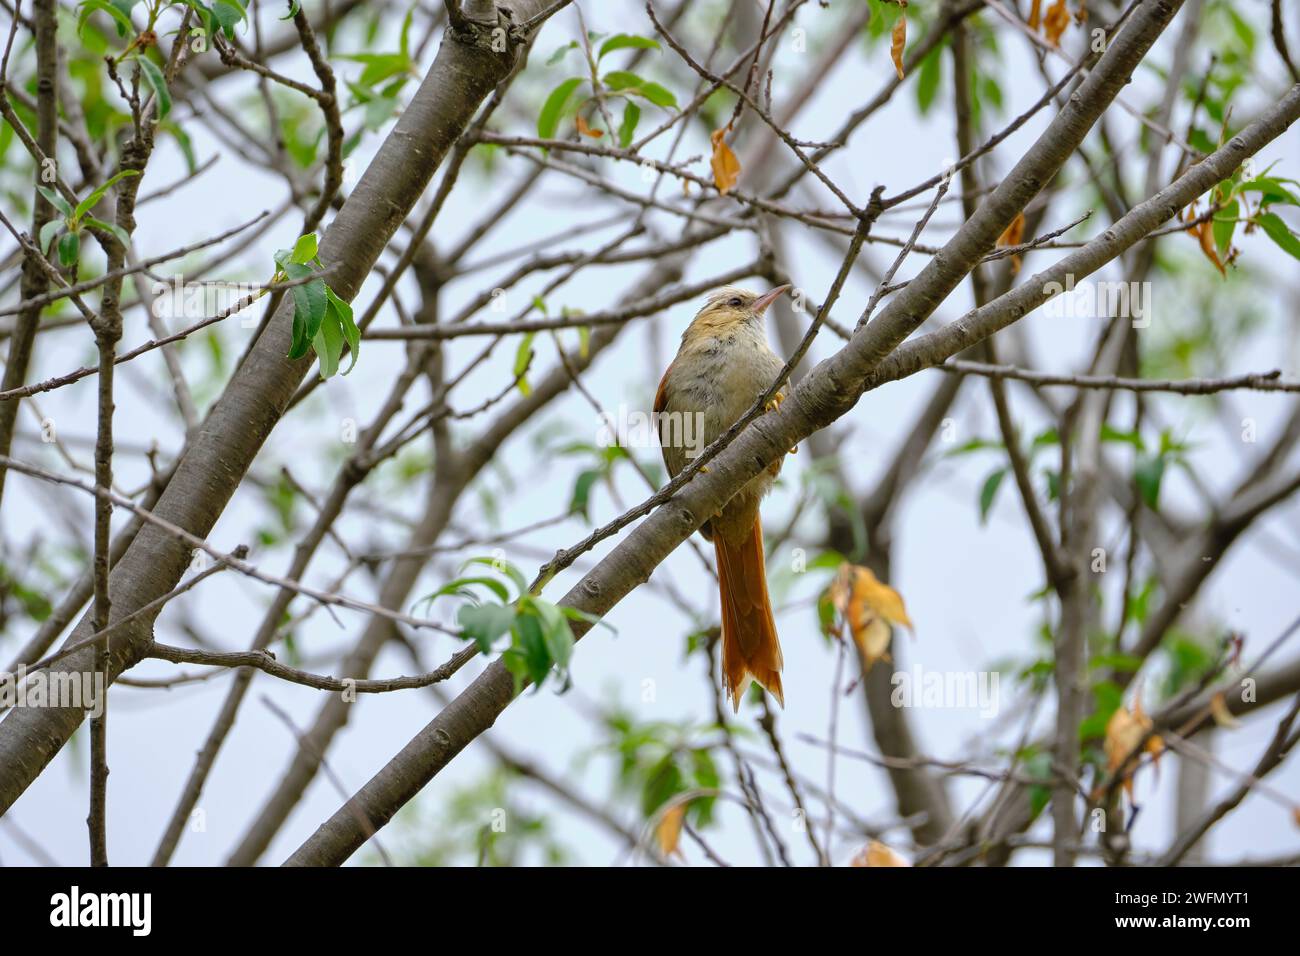 Creamy-crested Spinetail (Cranioleuca albicapilla), beautiful specimen perched on the branches of the shrub, endemic to Peru. Stock Photo